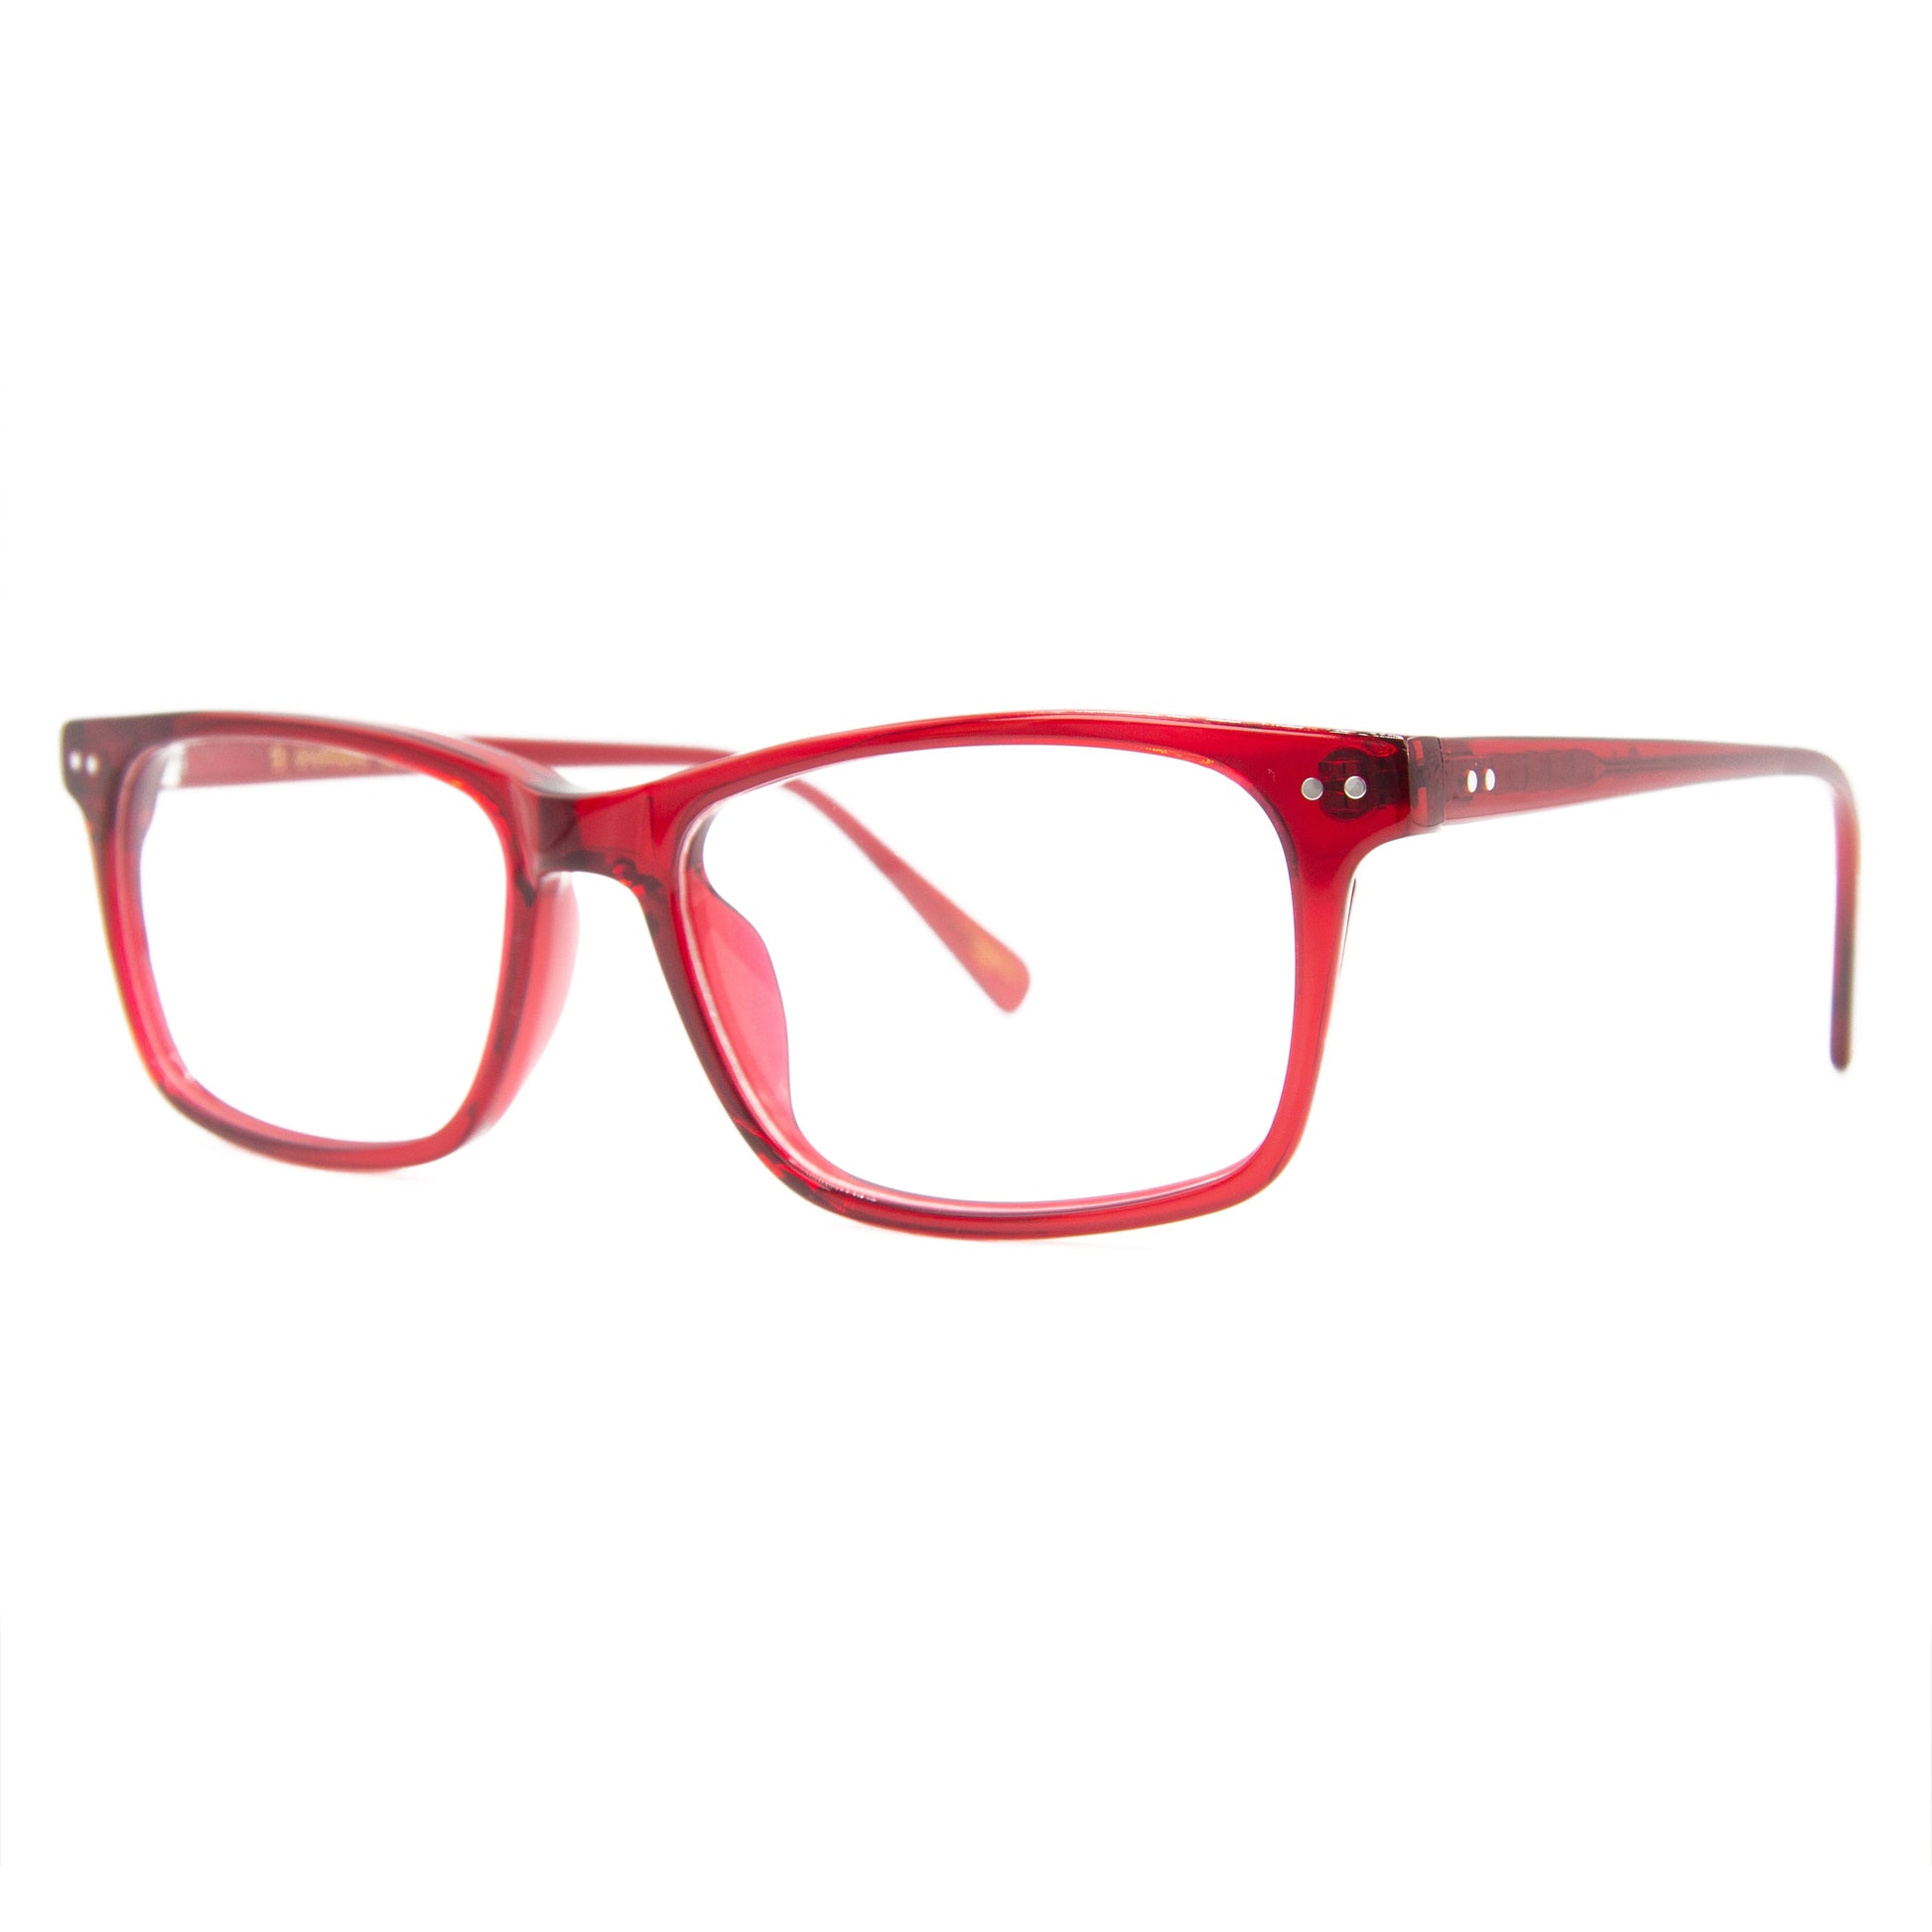 3 brothers - Mr Fred - Red - Prescription Glasses - Side